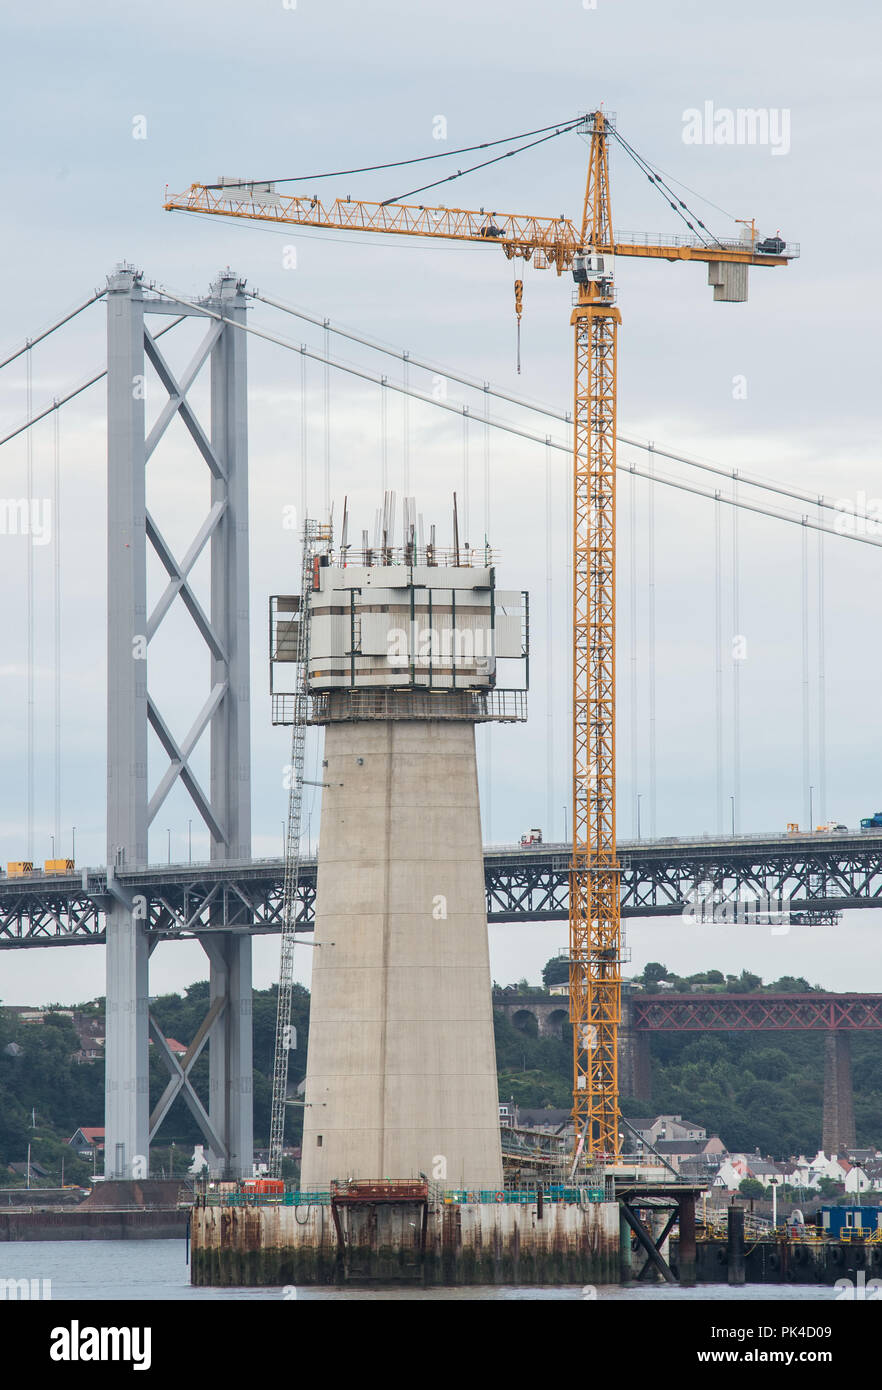 Photographer Ian Georgeson, 07921 567360 Forth replacement crossing, New Forth road bridge, Queensferry Crossing. Stock Photo